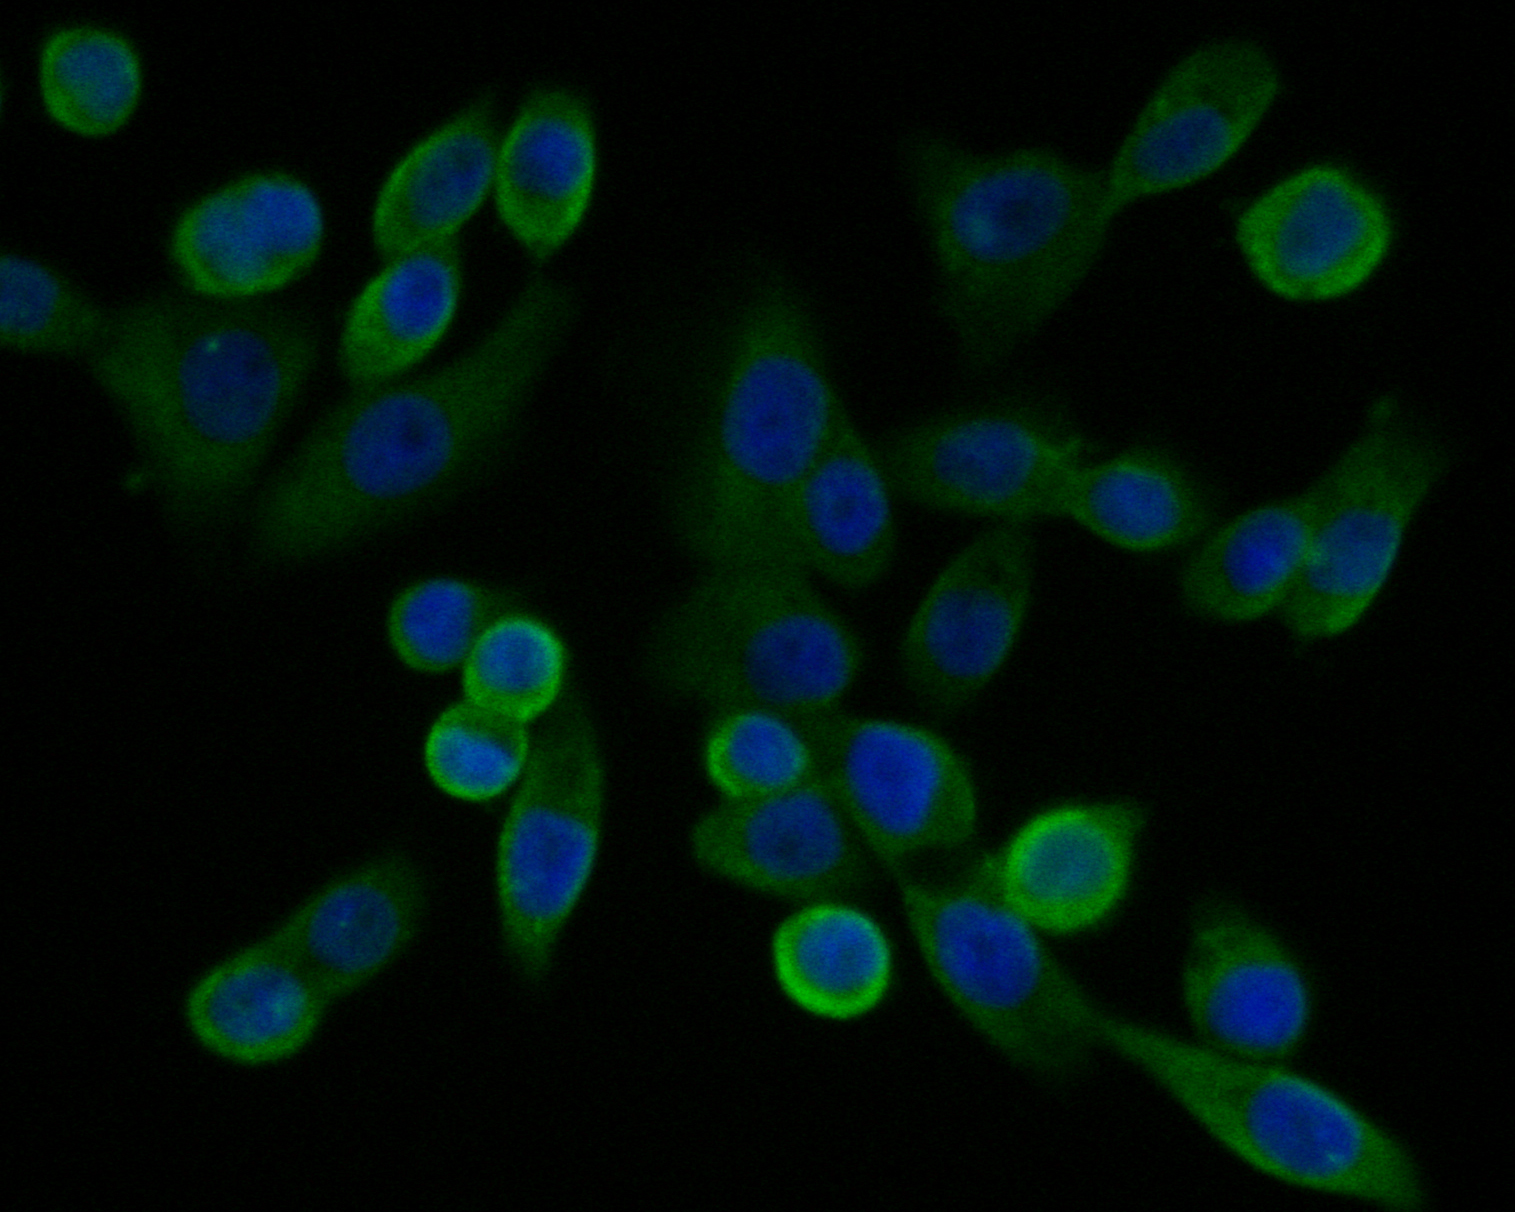 ICC staining of GABRB1 in LOVO cells (green). Formalin fixed cells were permeabilized with 0.1% Triton X-100 in TBS for 10 minutes at room temperature and blocked with 1% Blocker BSA for 15 minutes at room temperature. Cells were probed with the primary antibody (ER1901-66, 1/100) for 1 hour at room temperature, washed with PBS. Alexa Fluor®488 Goat anti-Rabbit IgG was used as the secondary antibody at 1/1,000 dilution. The nuclear counter stain is DAPI (blue).